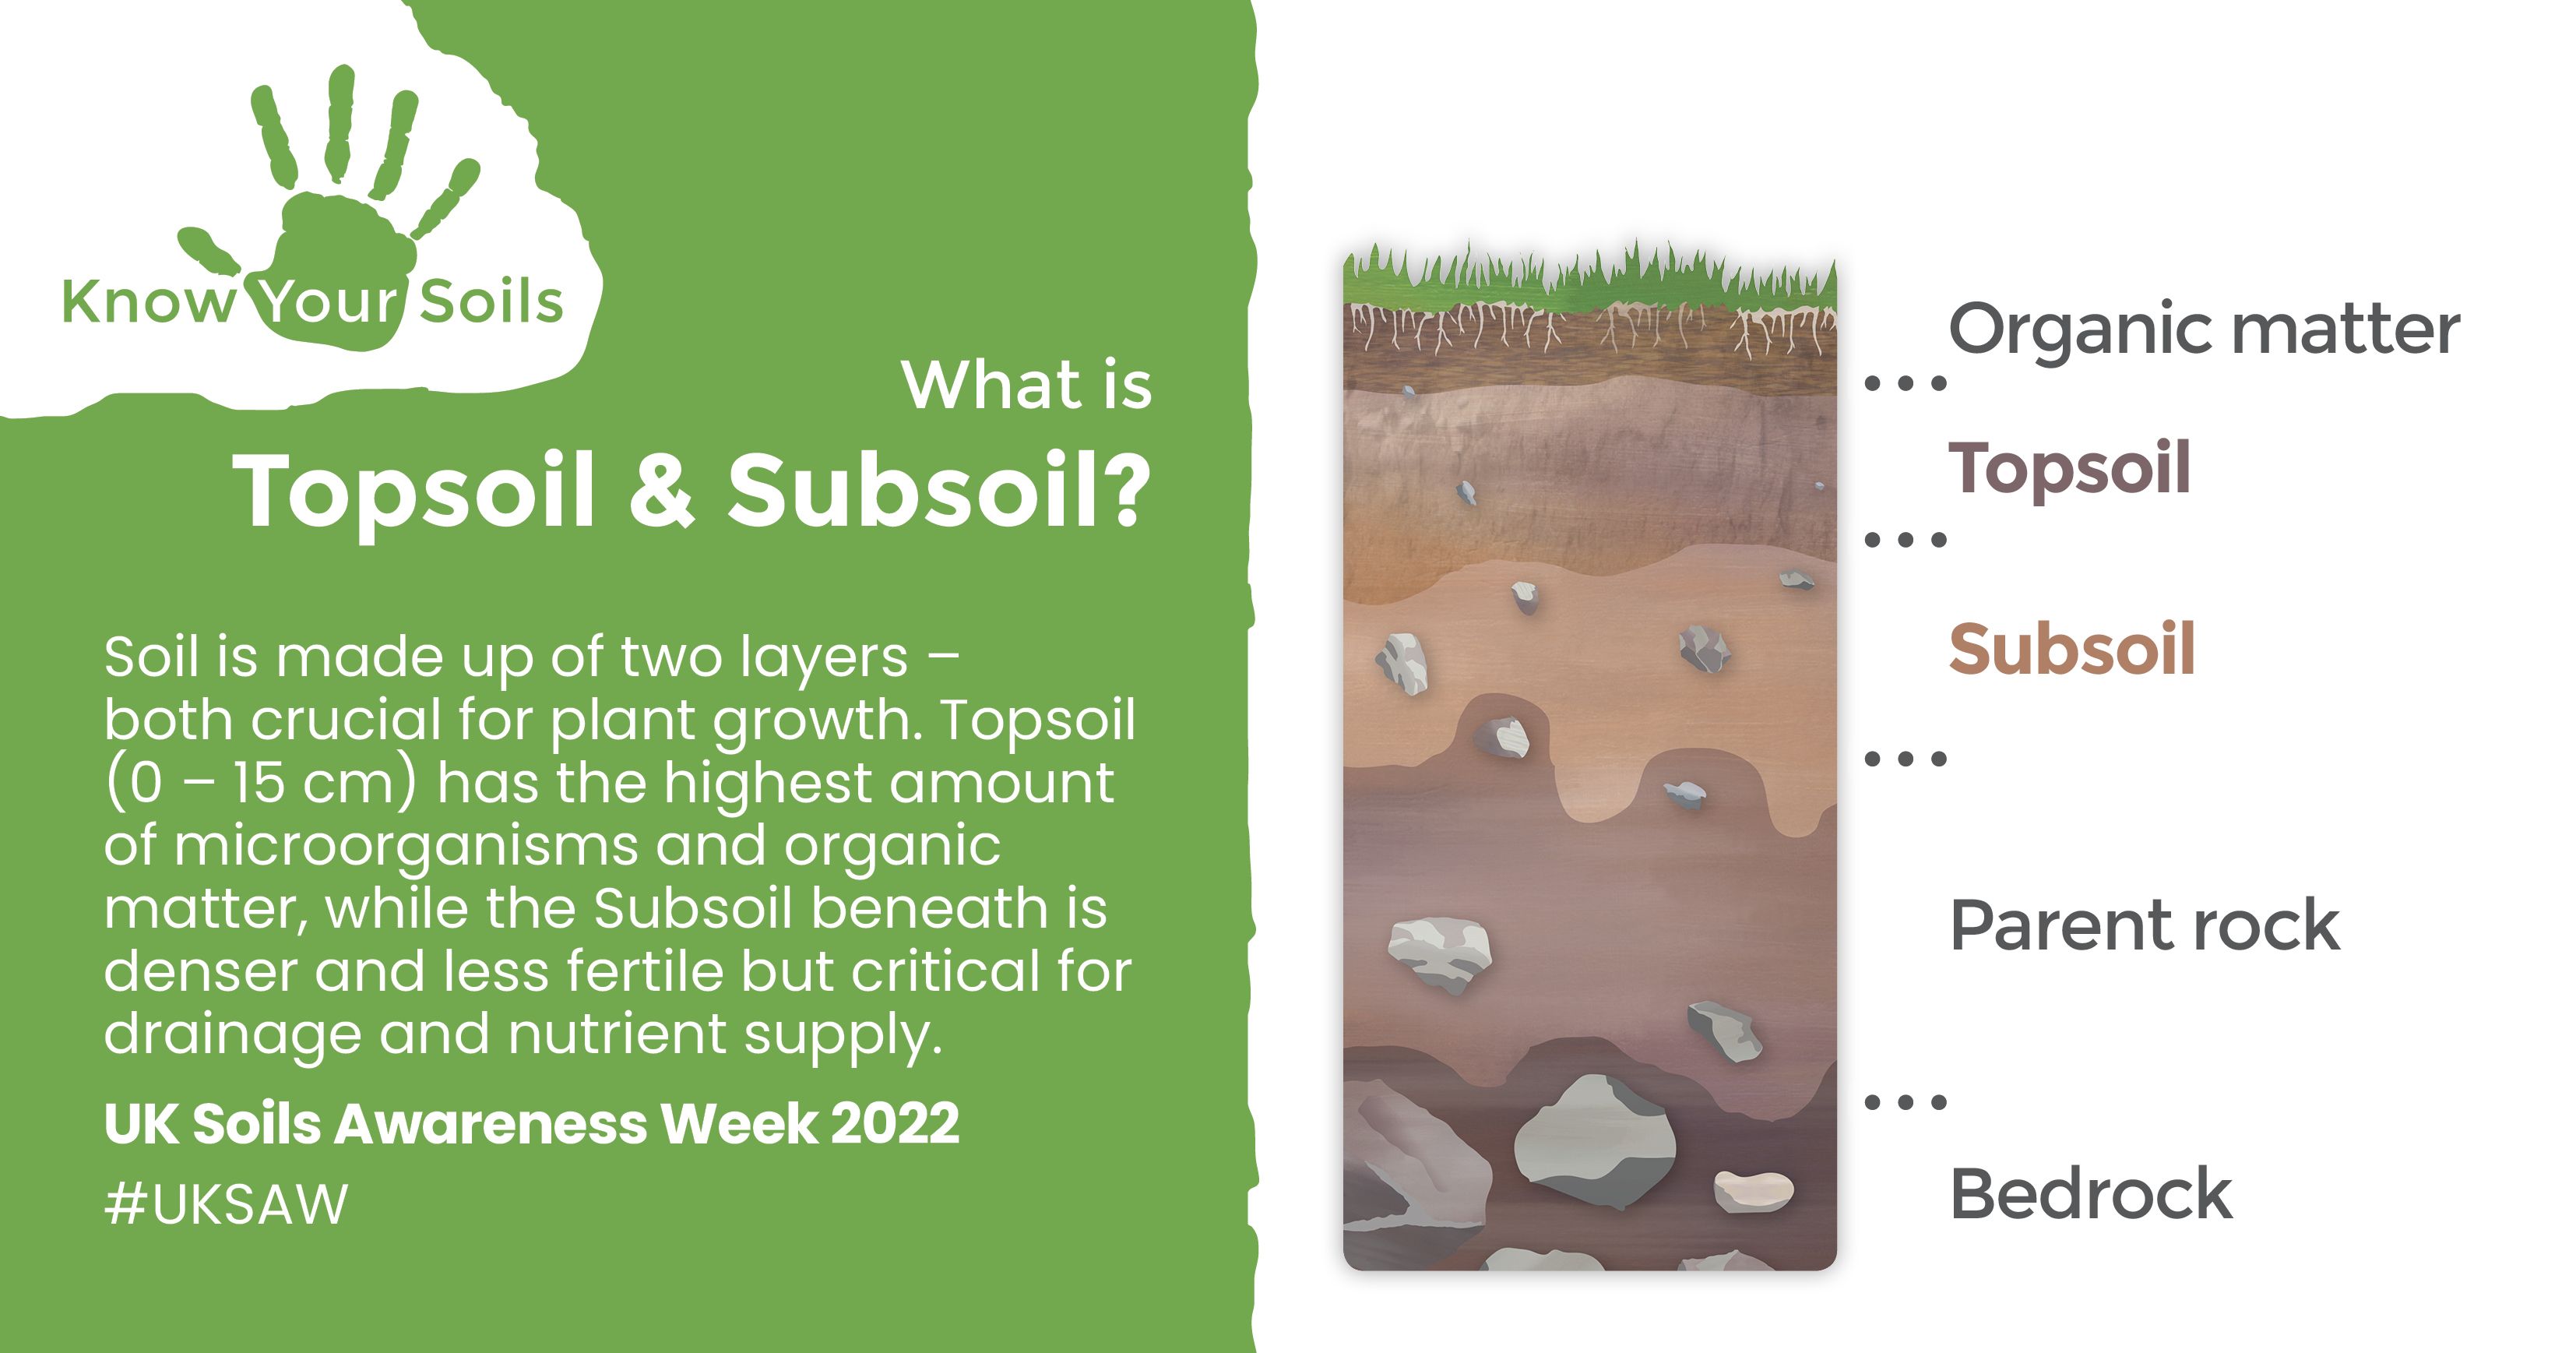 Topsoil and subsoil